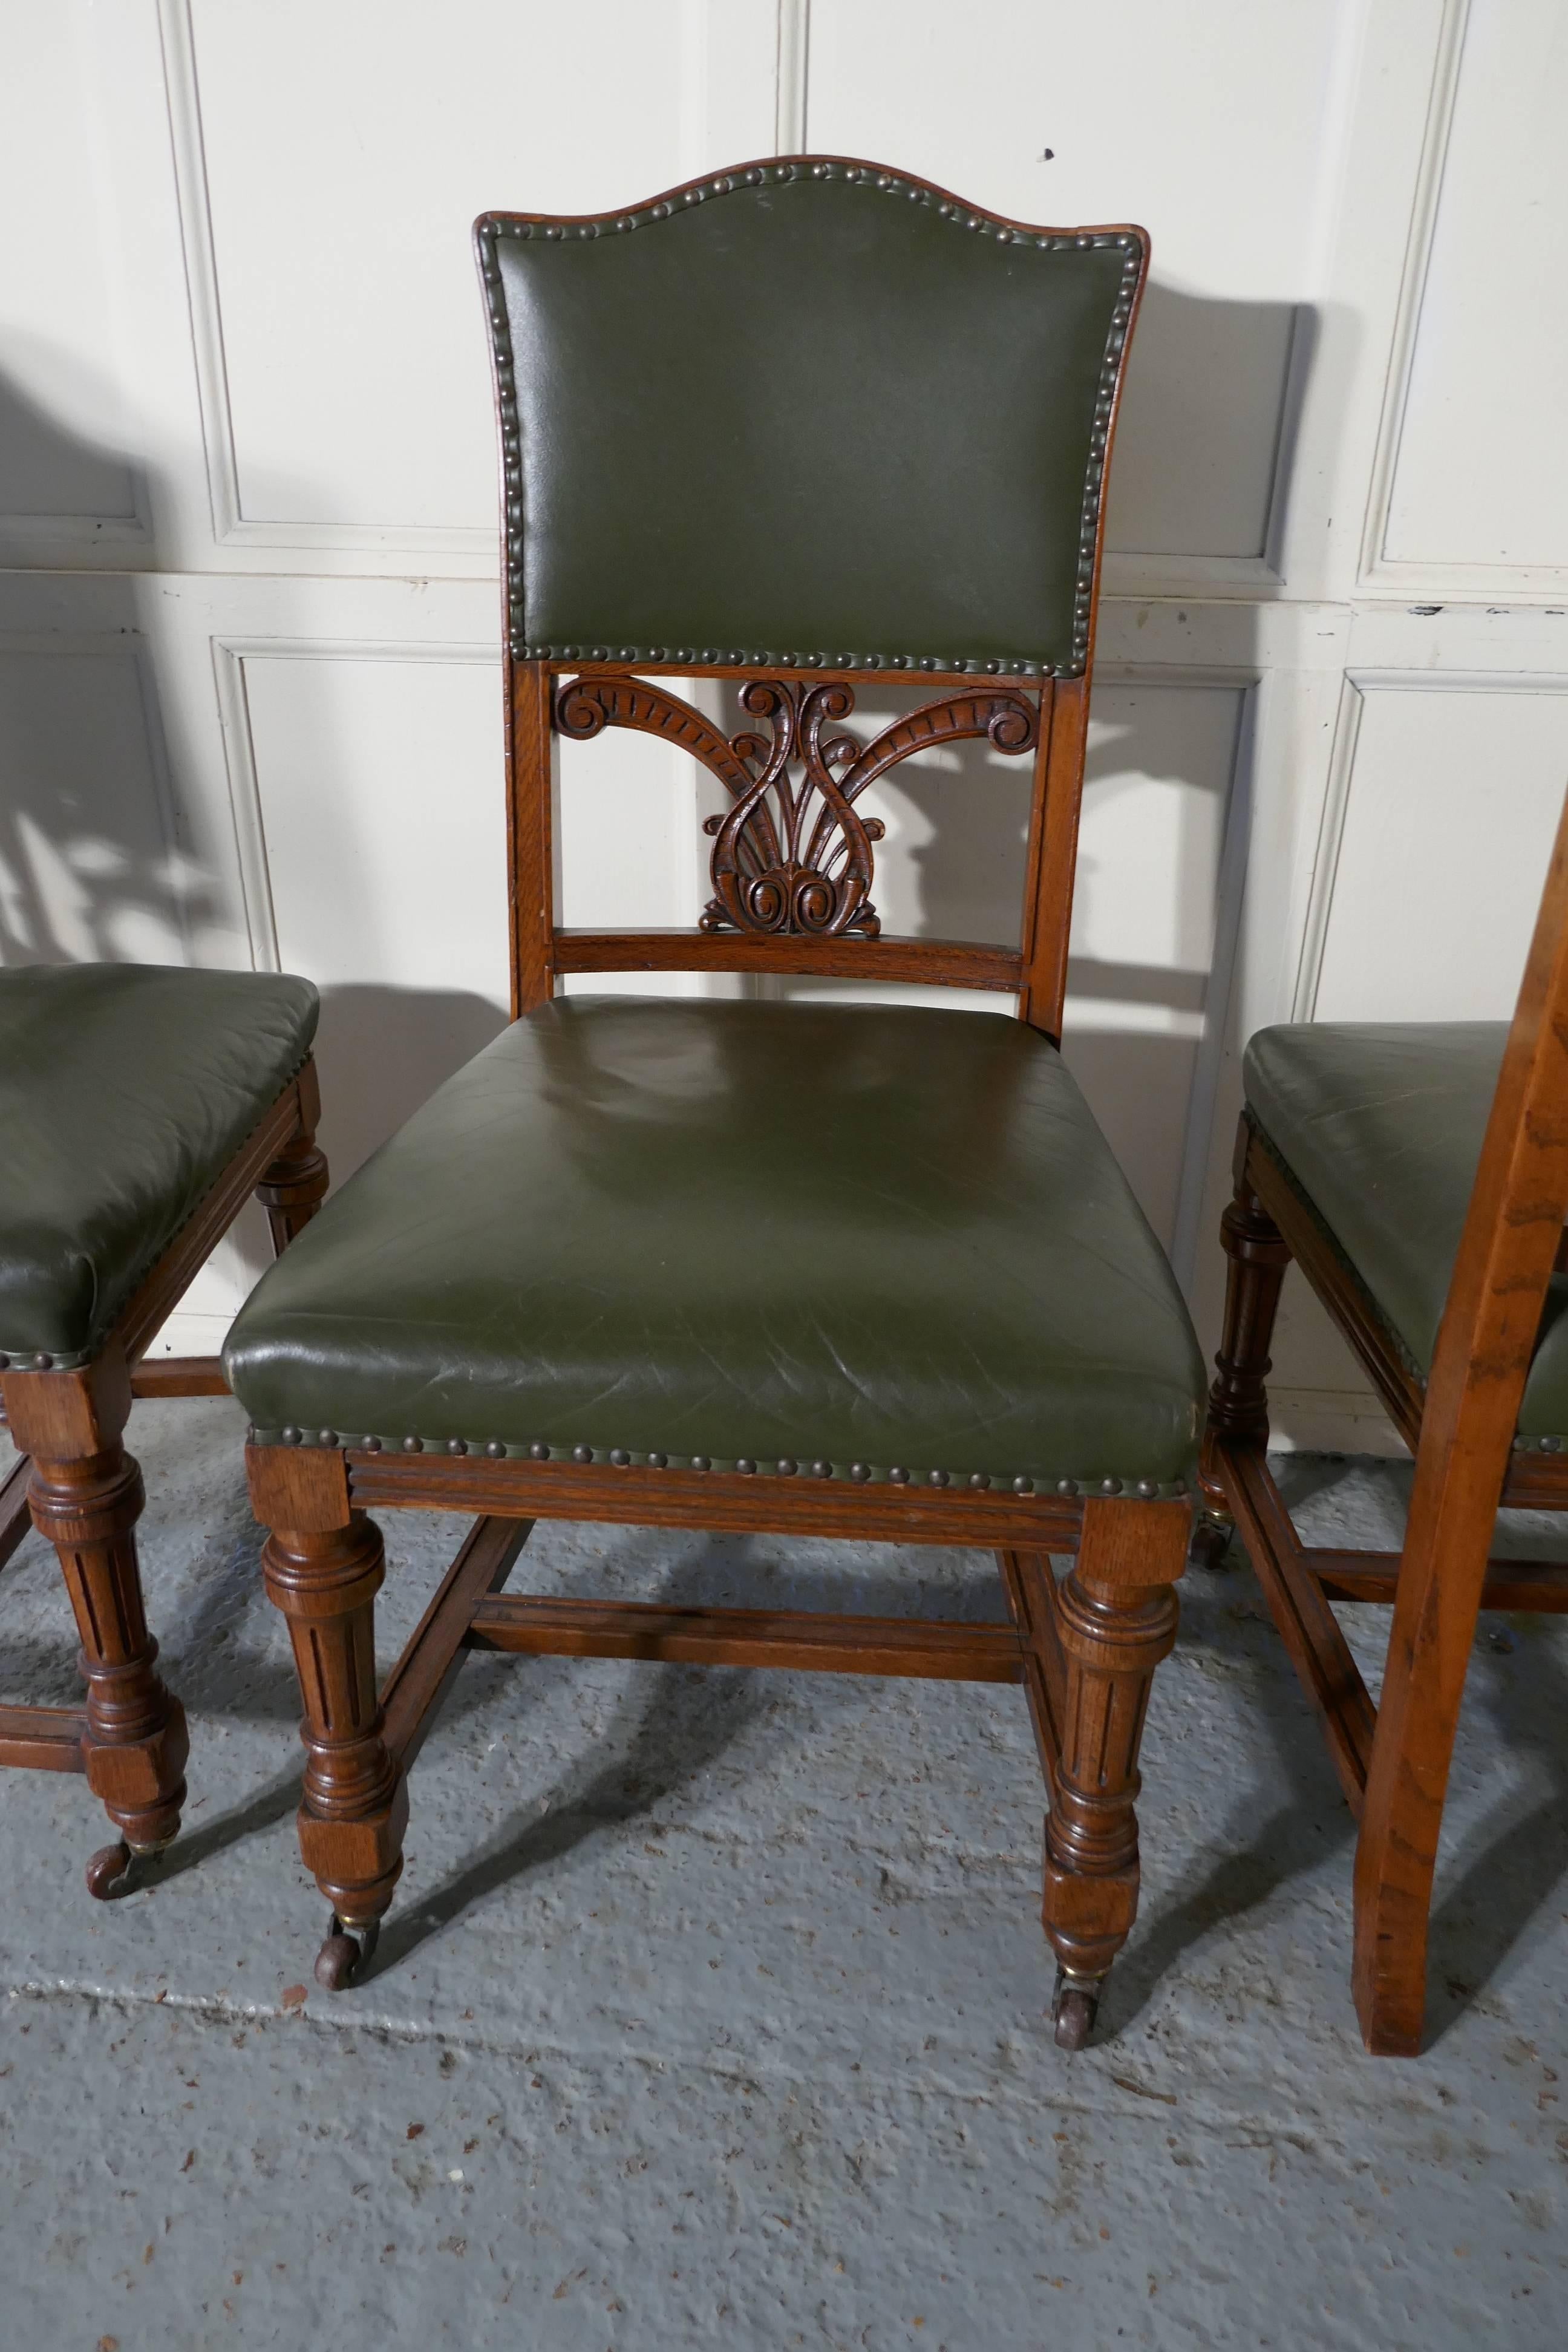 Set of 11 Arts & Crafts golden oak and leather dining chairs 
 
This is a superb quality heavy weight set of dining chairs, they are made in golden oak and upholstered in soft bottle green leather hide
The set has 11 single chairs, they have a